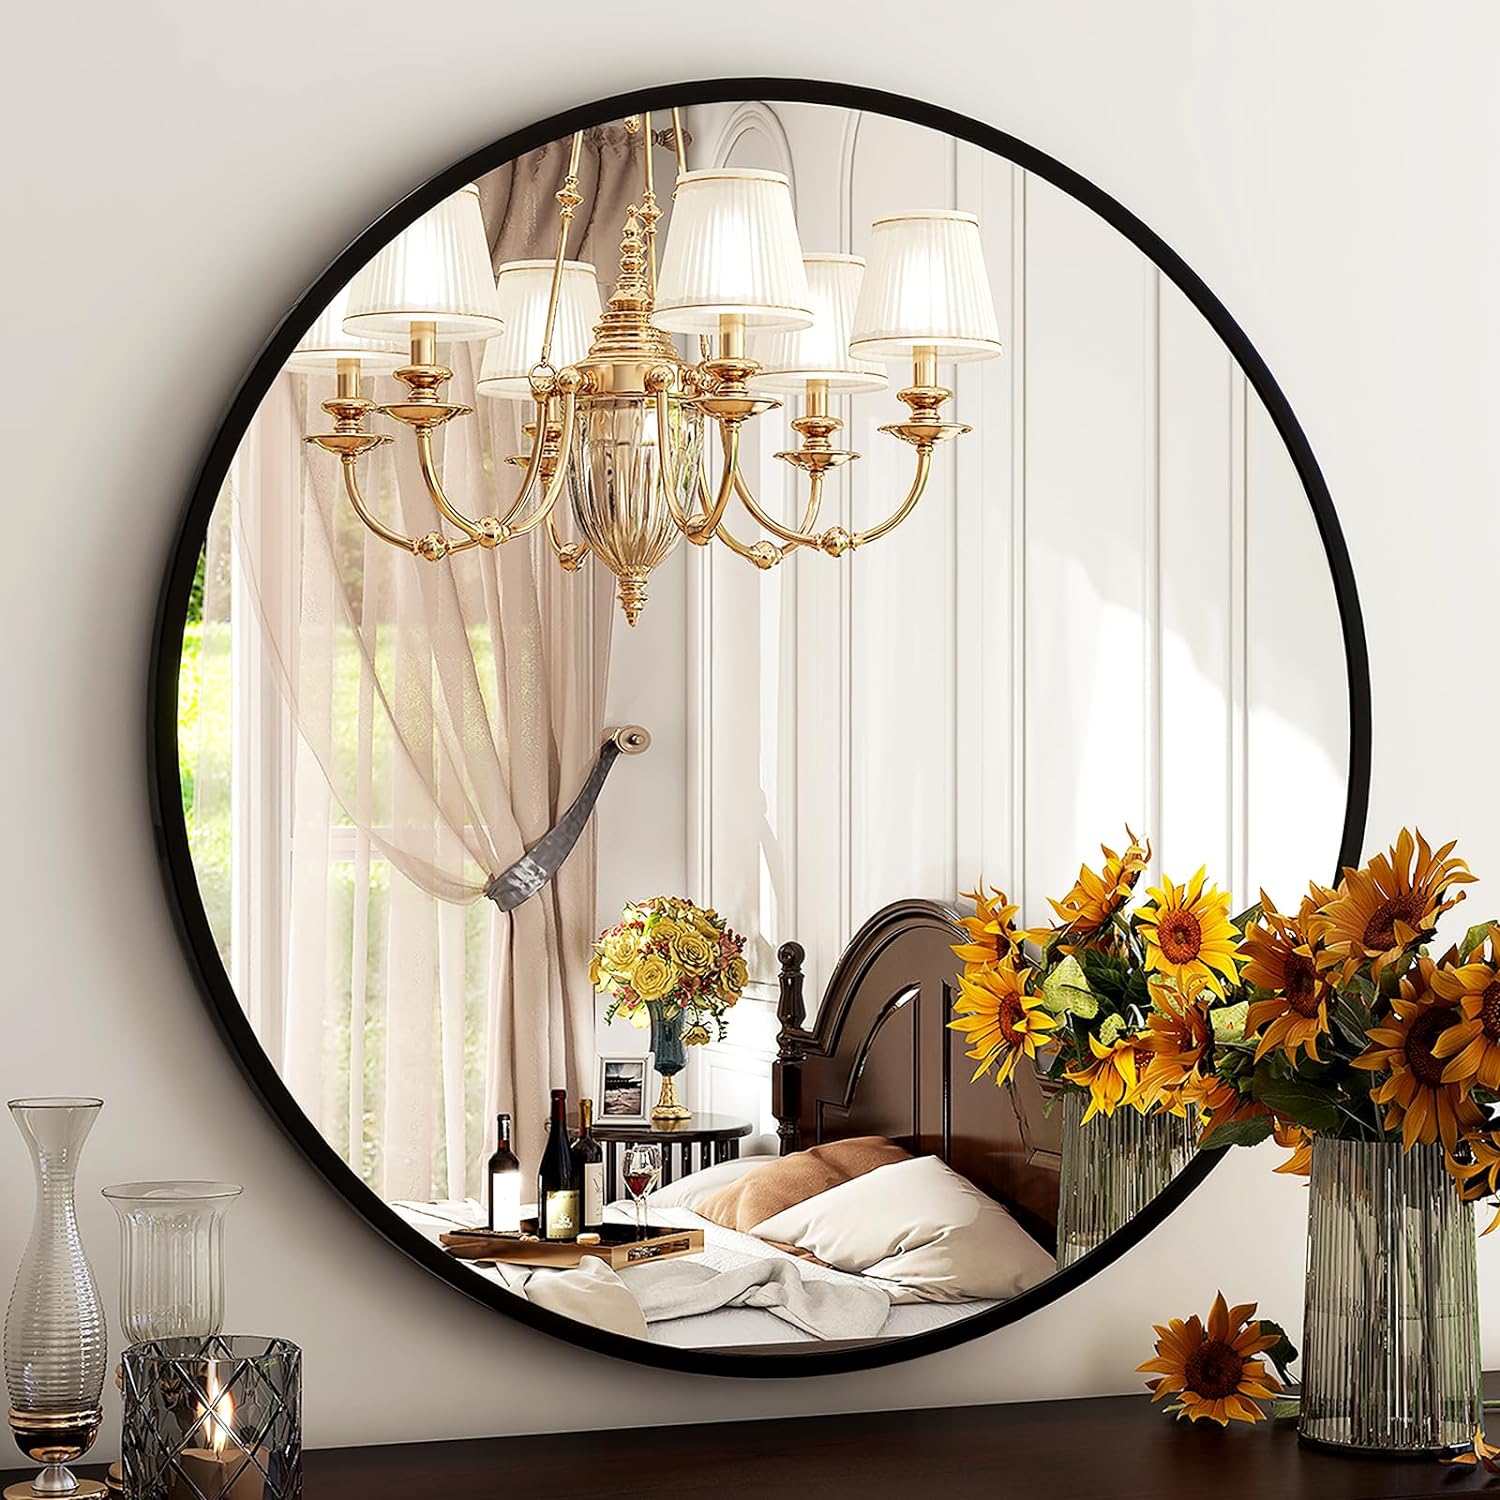 If you have priced mirrors they are expensive now, like everything else!!! But this mirror is a nice size and looks like some mirrors that I have seen twice this price and up. I put it in our foyer and it looks great with the walnut console table with black metal trim on it. I bought the table from Amazon, too. Love everything about the mirror. I am thinking about buying one for the guest bath to replace the outdated mirror in there. Oh, and the mirror is light weight, so easy to hang.